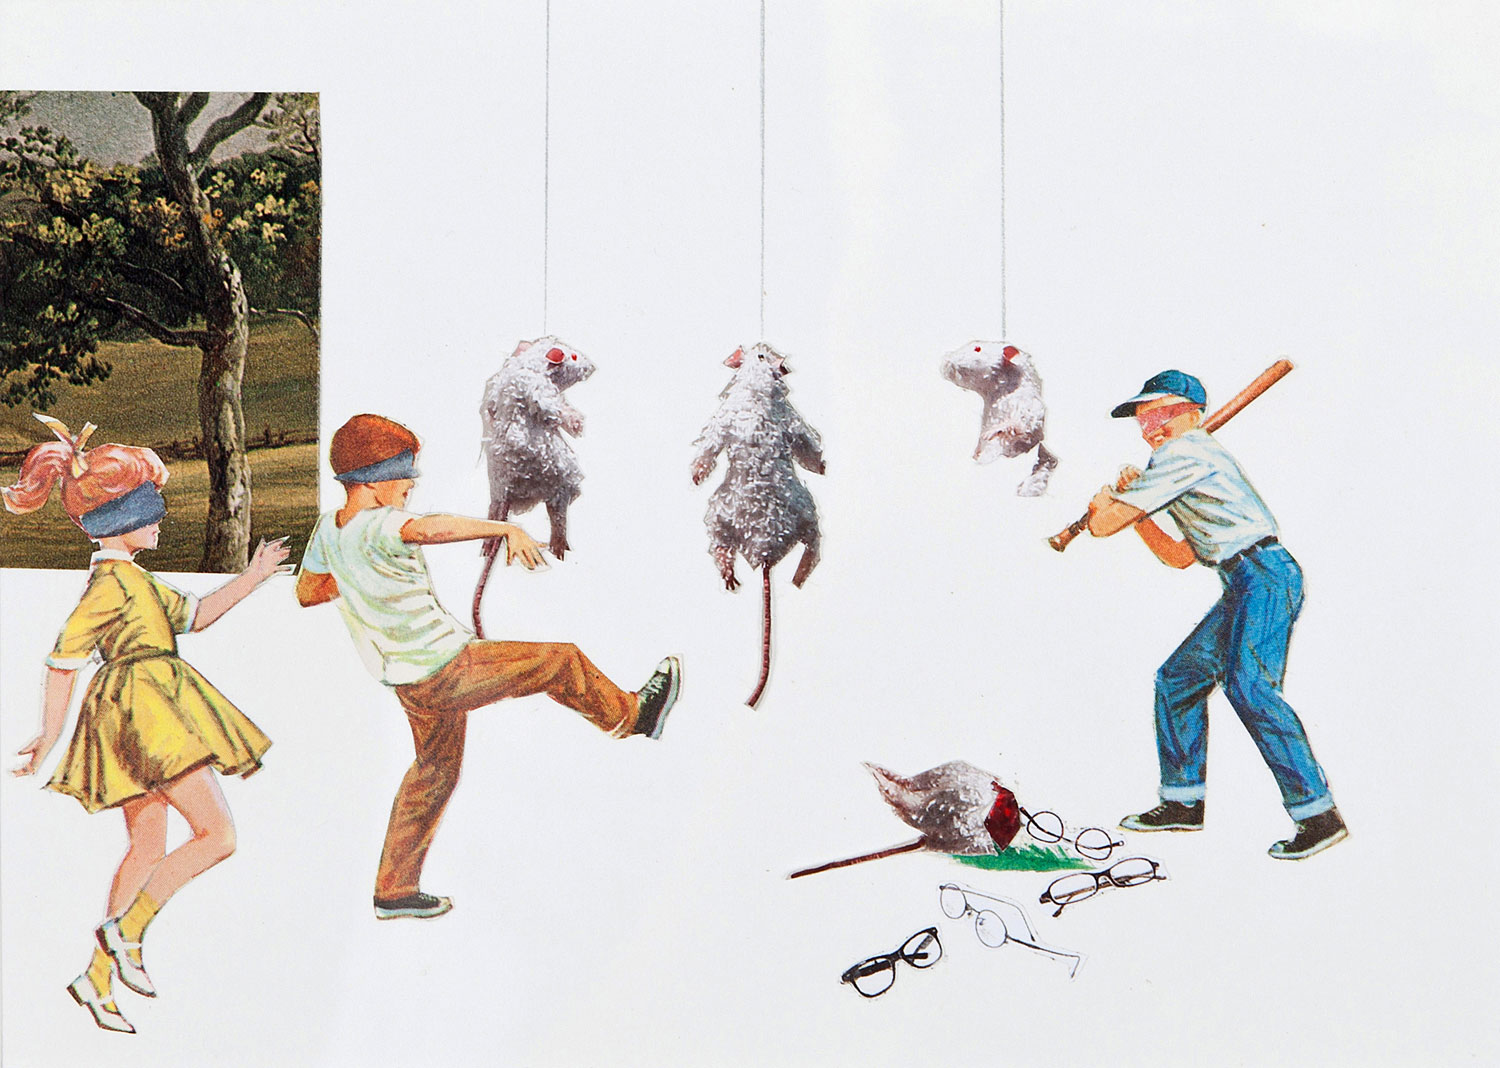 Maria Lux, Three Blind Mice, 2013. Collage, 5 x 7 in.